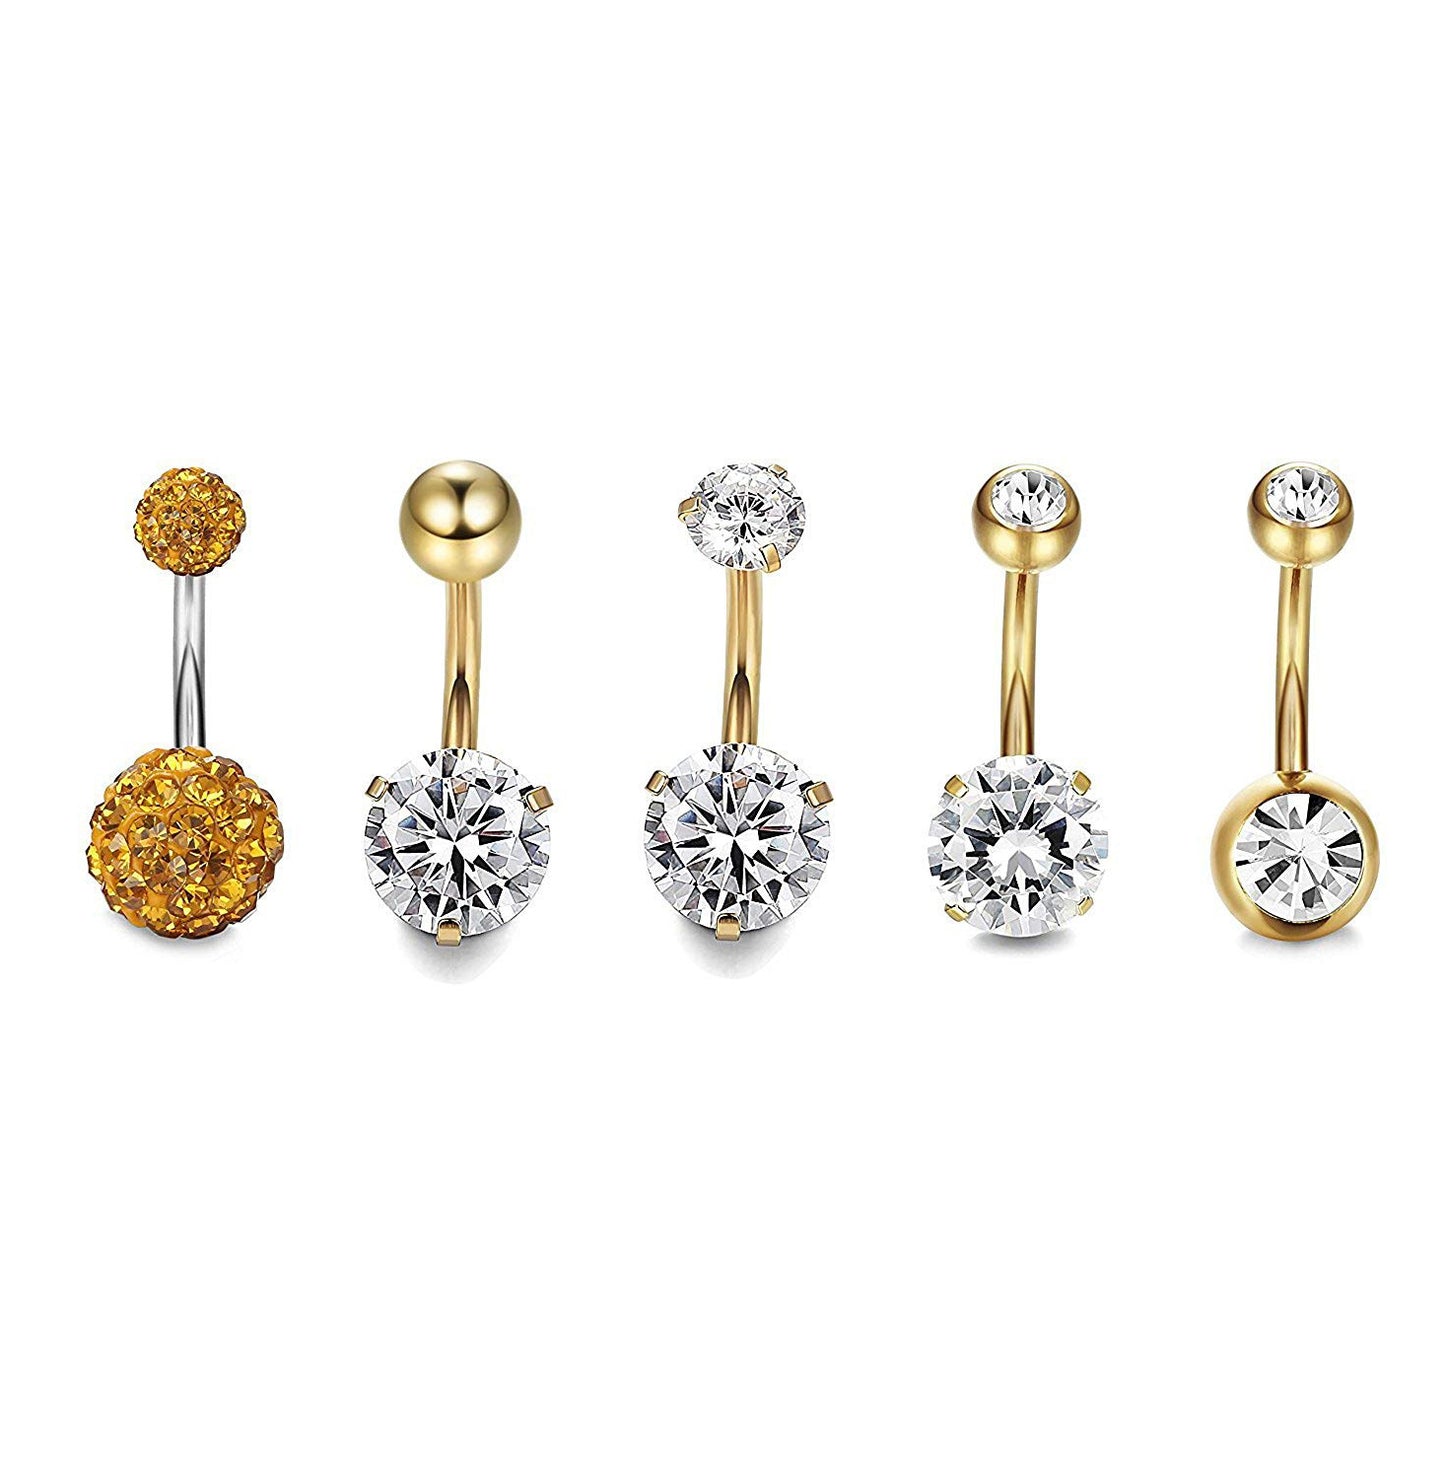 Stainless Steel Zircon Rose Gold Belly Button Ring Set